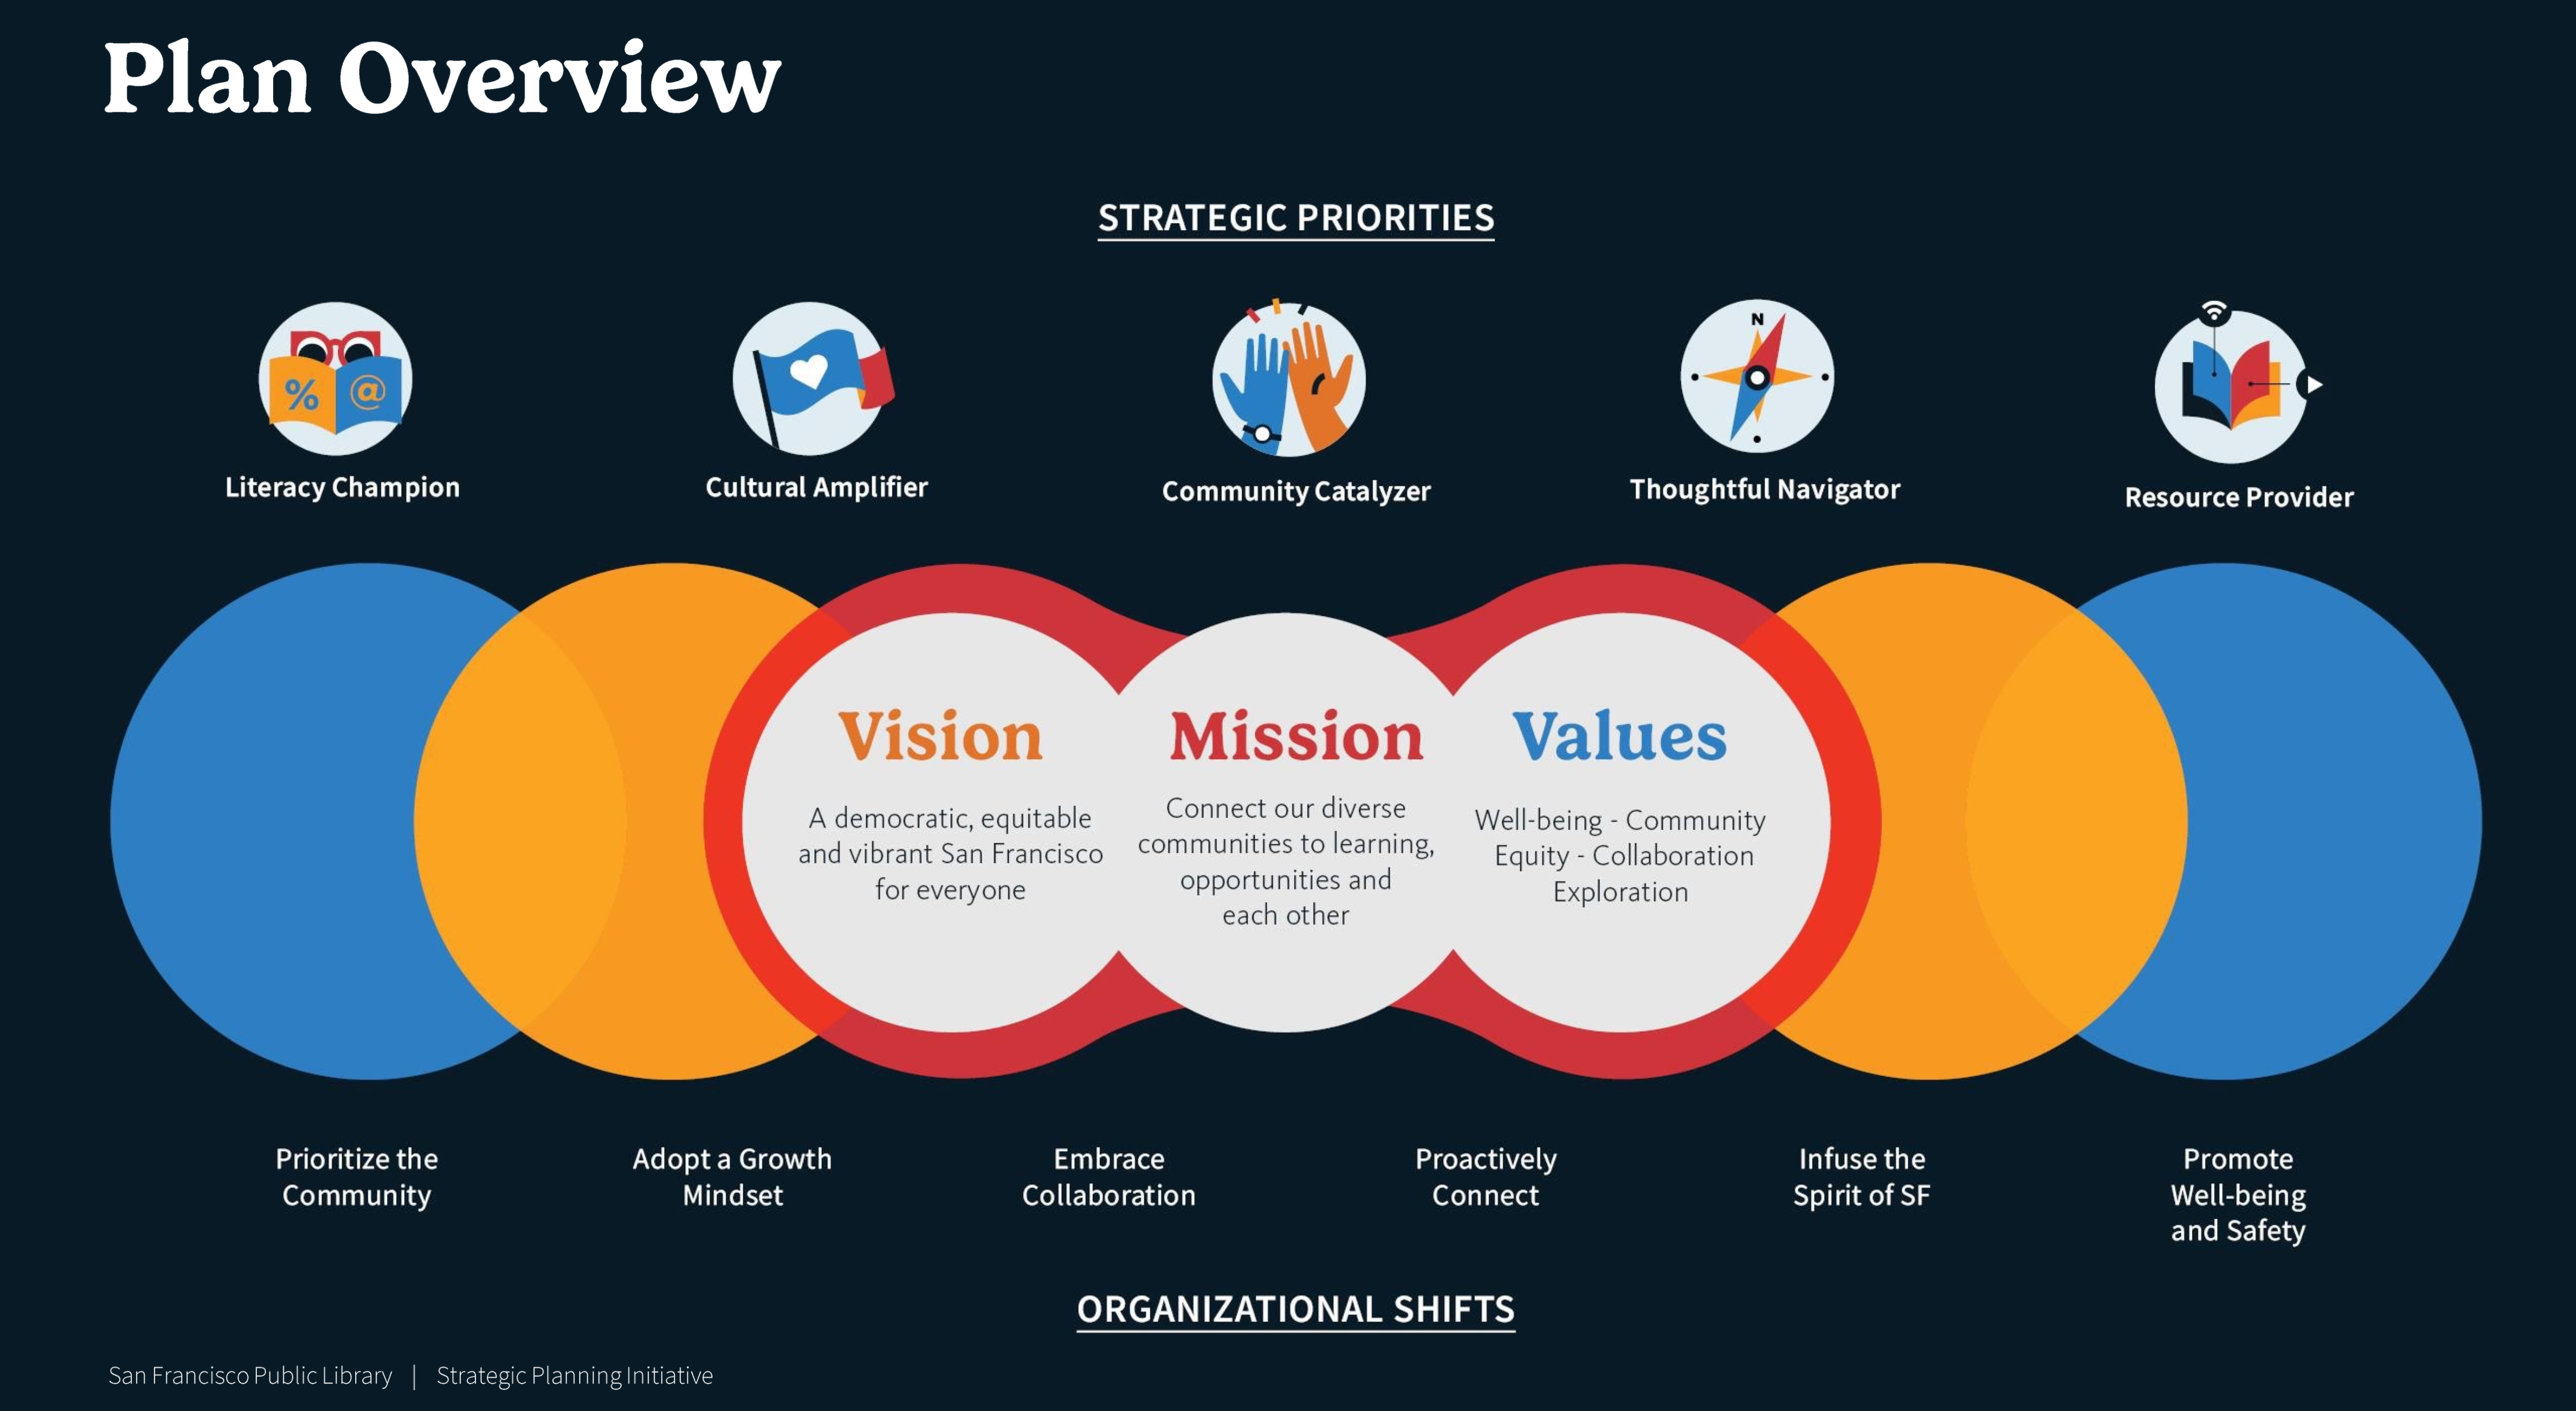 Image: A Diagram lays out SFPL’s new Vision, Mission, and Values in the center. Above are the new Strategic Priorities listed, below are the new Organizational Shifts. 